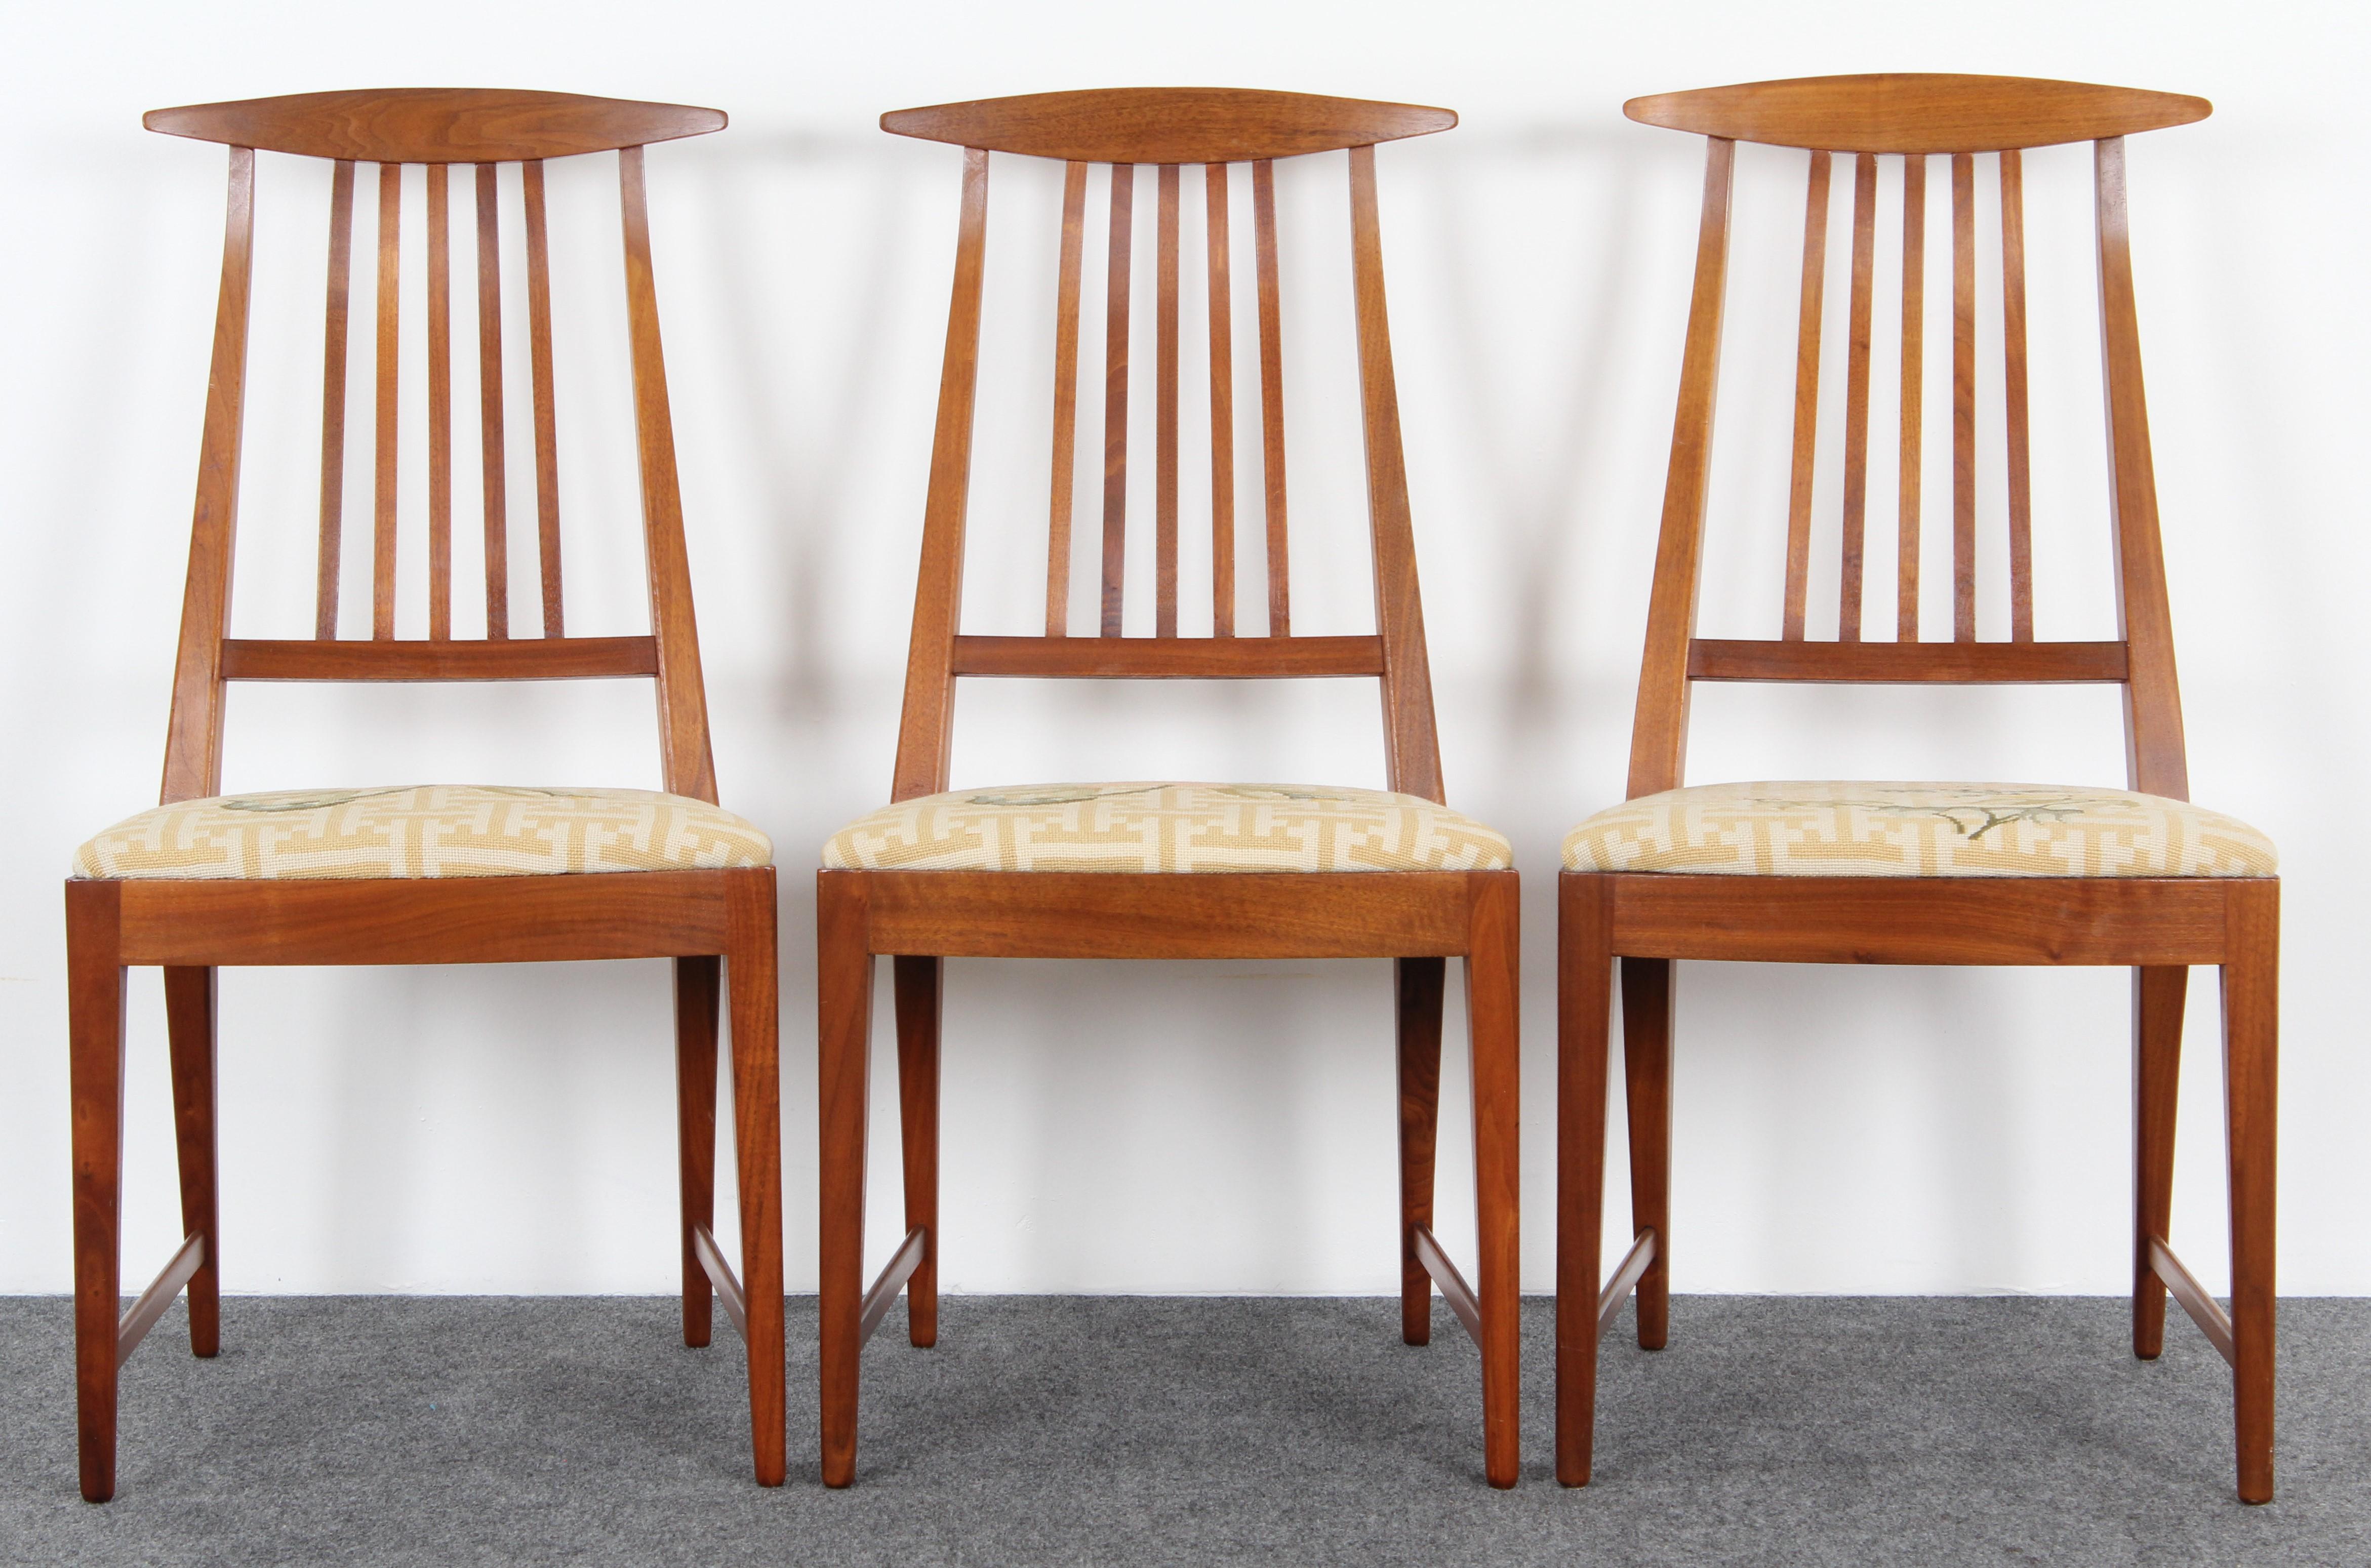 Set of Six Kipp Stewart dining chairs for Calvin, 1950s with hand needlepoint seats. This set of walnut side chairs are structurally sound and very comfortable. Chairs are in good condition with age appropriate wear including some minor dings and